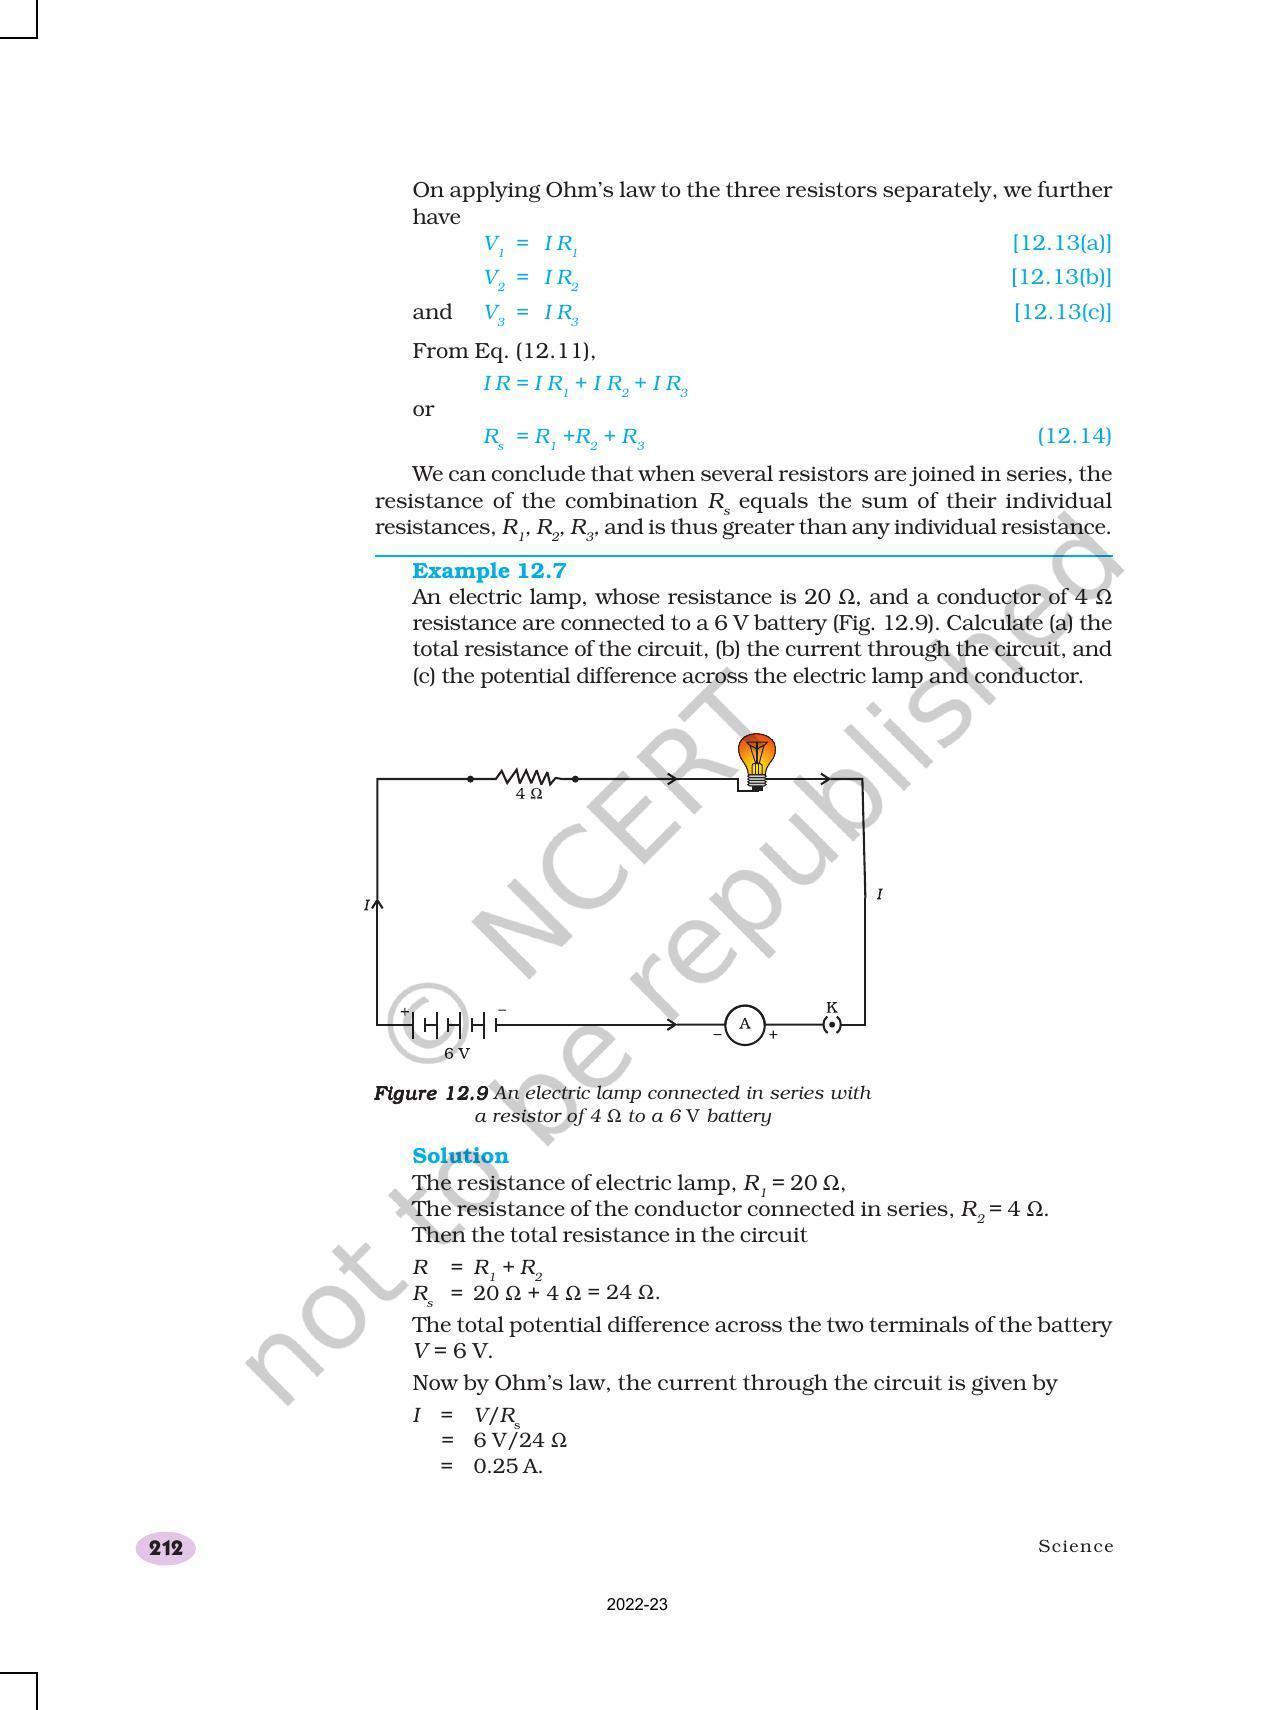 NCERT Book for Class 10 Science Chapter 12 Electricity - Page 14